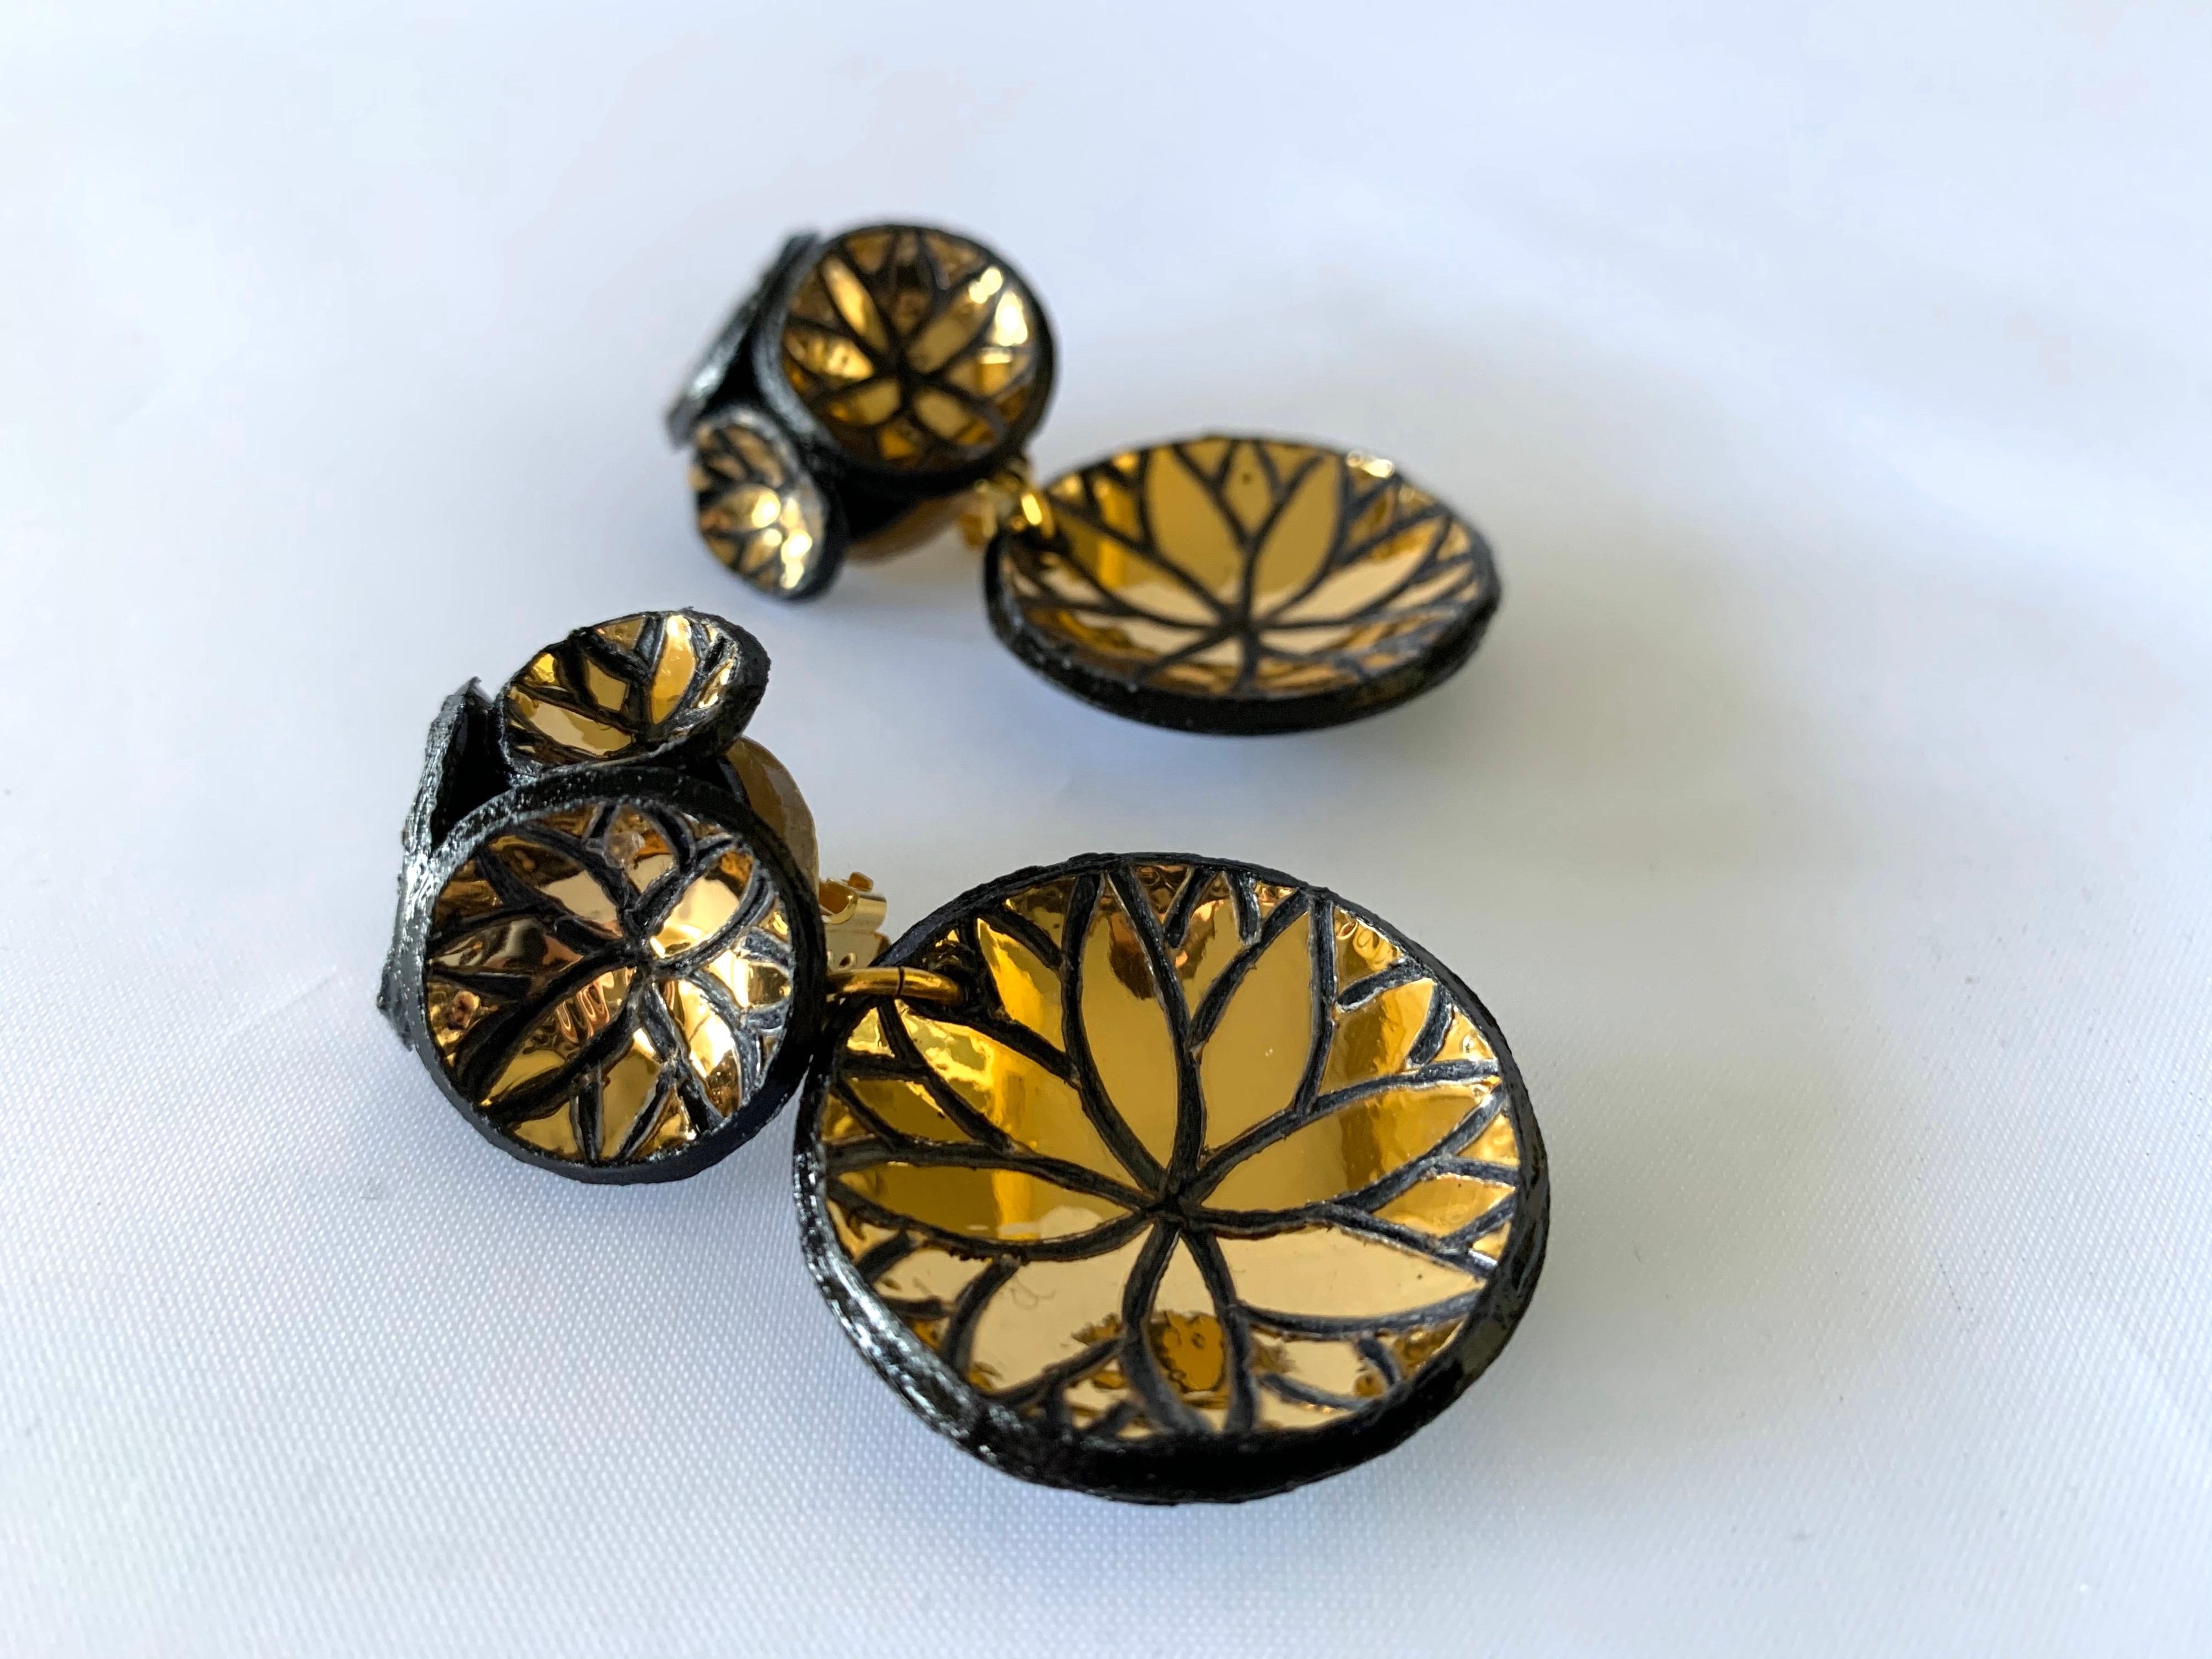 Light and easy to wear, these handmade artisanal contemporary disk earrings were made in Paris by Cilea. Concave black resin discs embellished with metallic gold leaf, clustered together to form a powerful statement piece - signed Cilea Paris on the